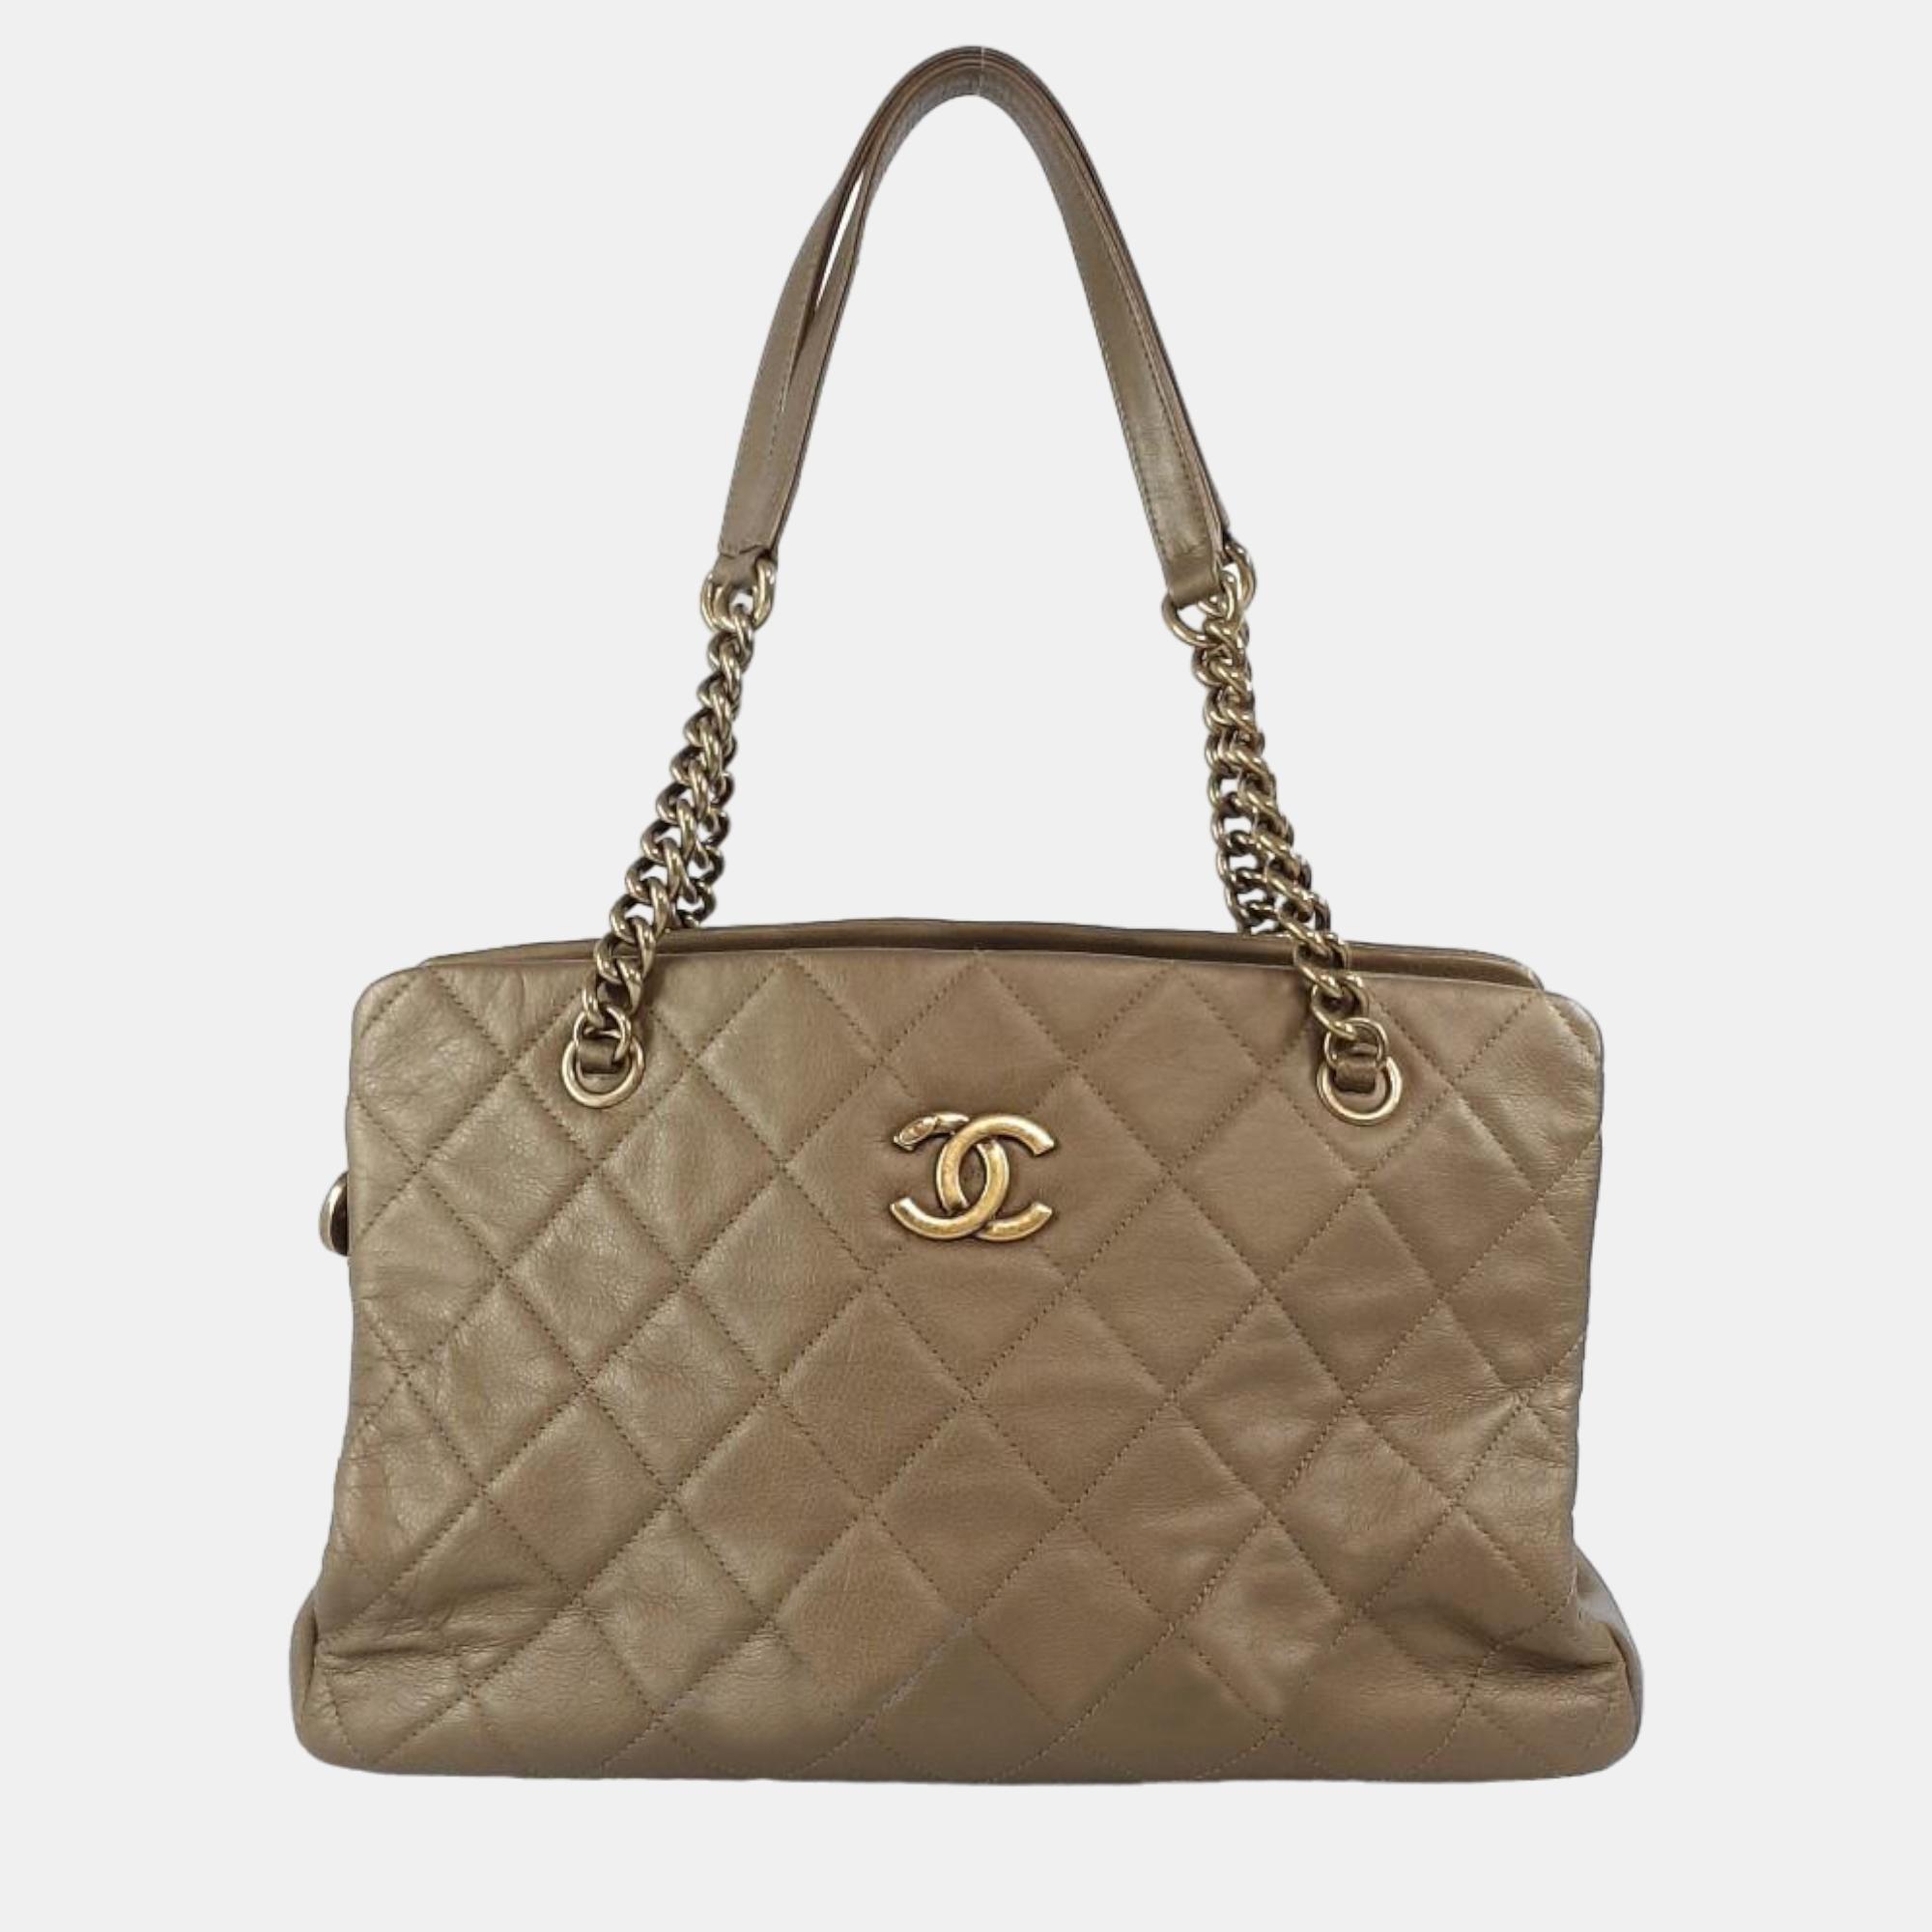 Pre-owned Chanel Brown Leather Cc Crown Tote Bag